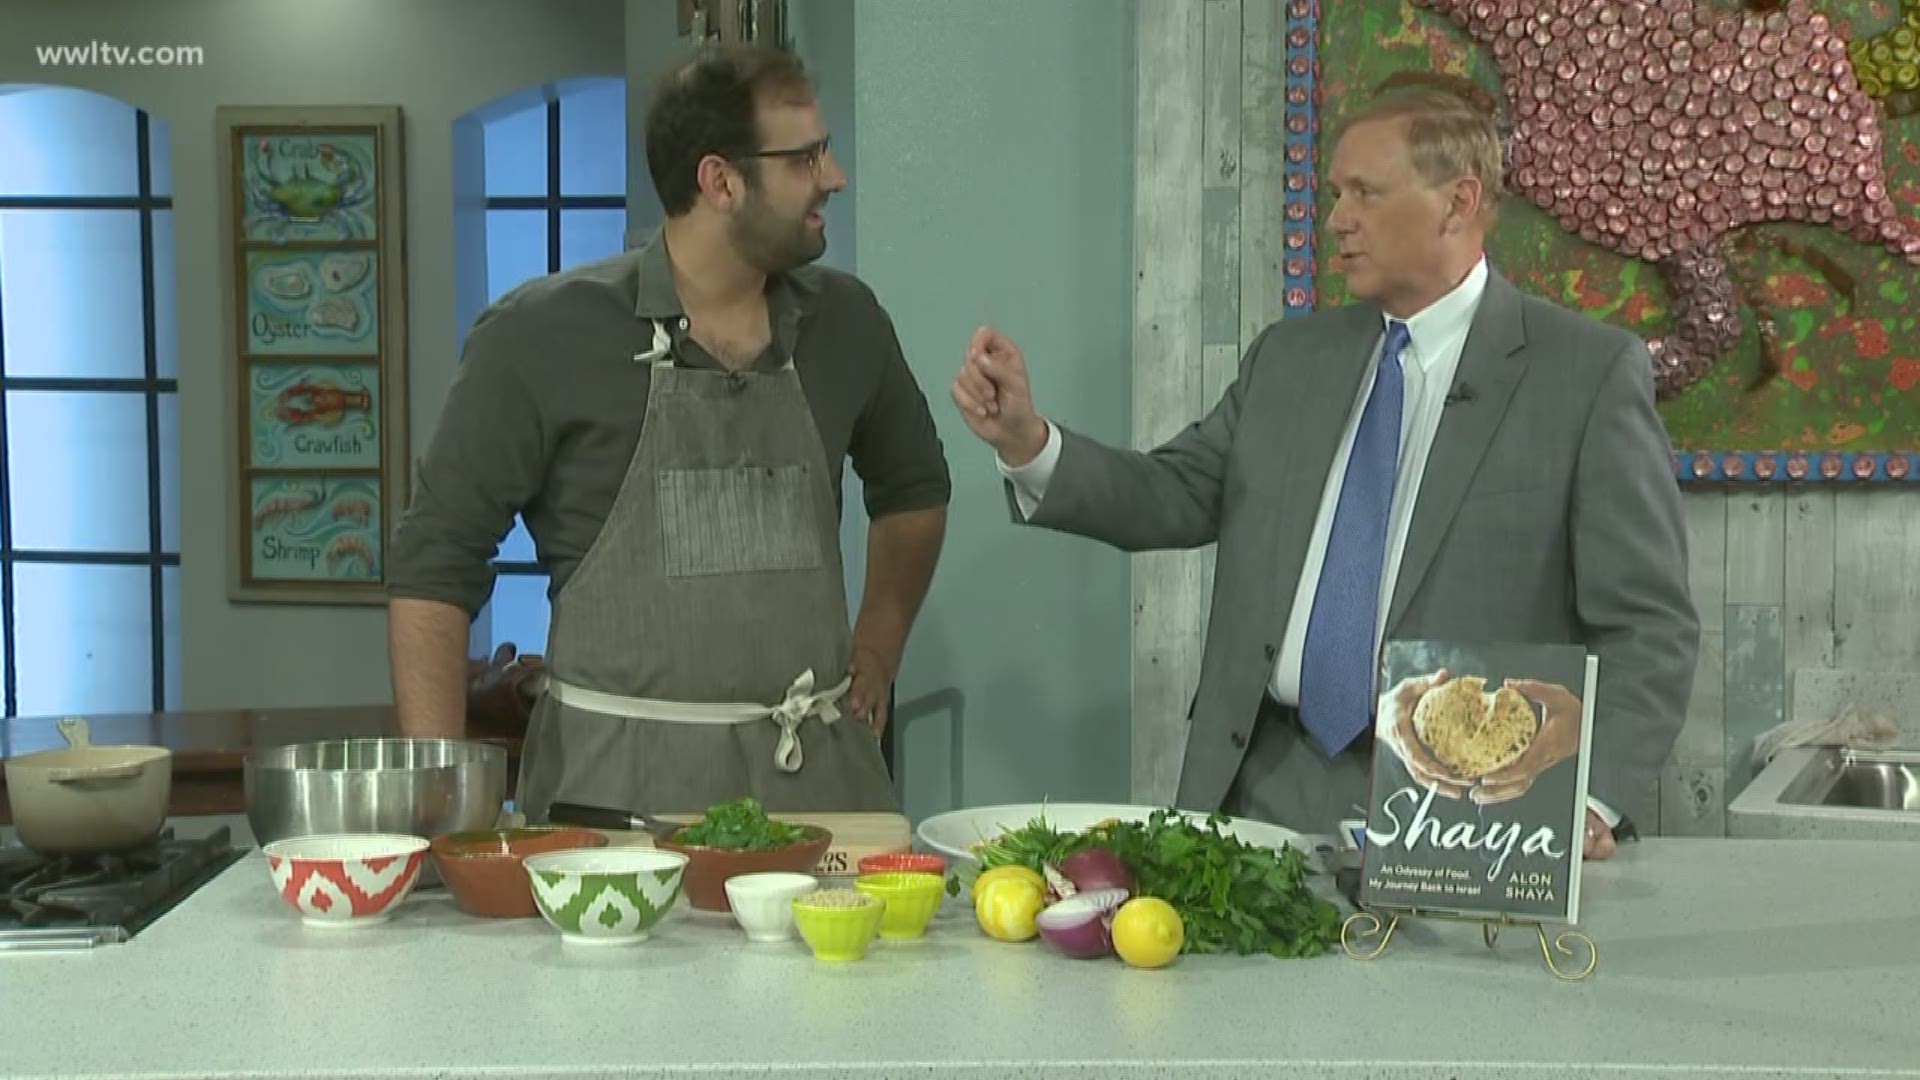 Chef Alon Shaya talks about his new cookbook "Shaya: An Odyssey of Food, My Journey Back to Israel"